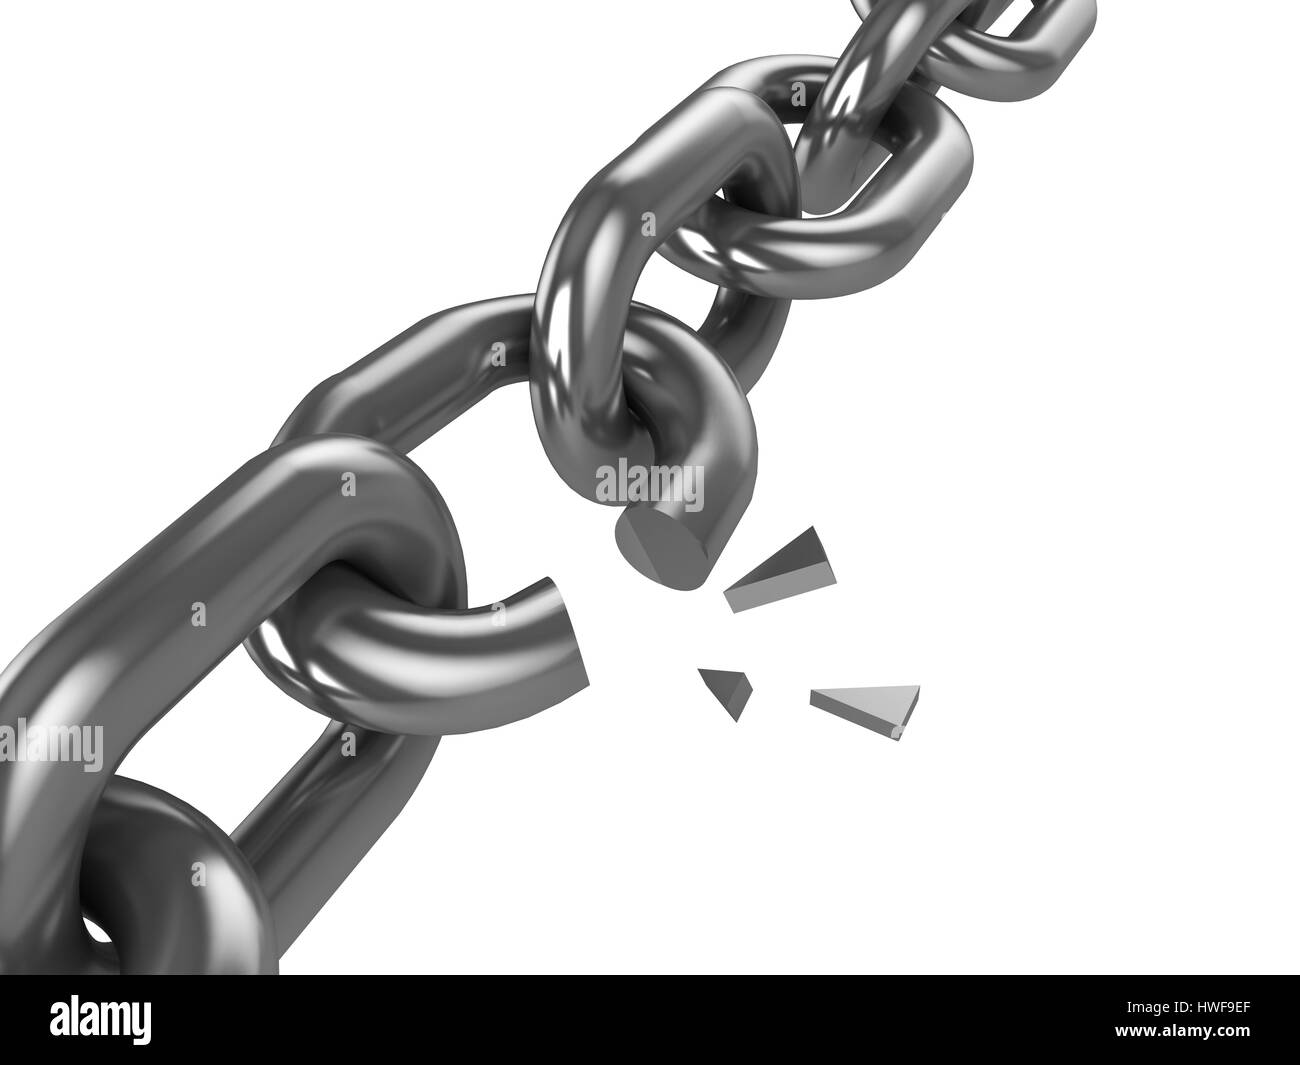 3d illustration of broken chain isolated over white background Stock Photo